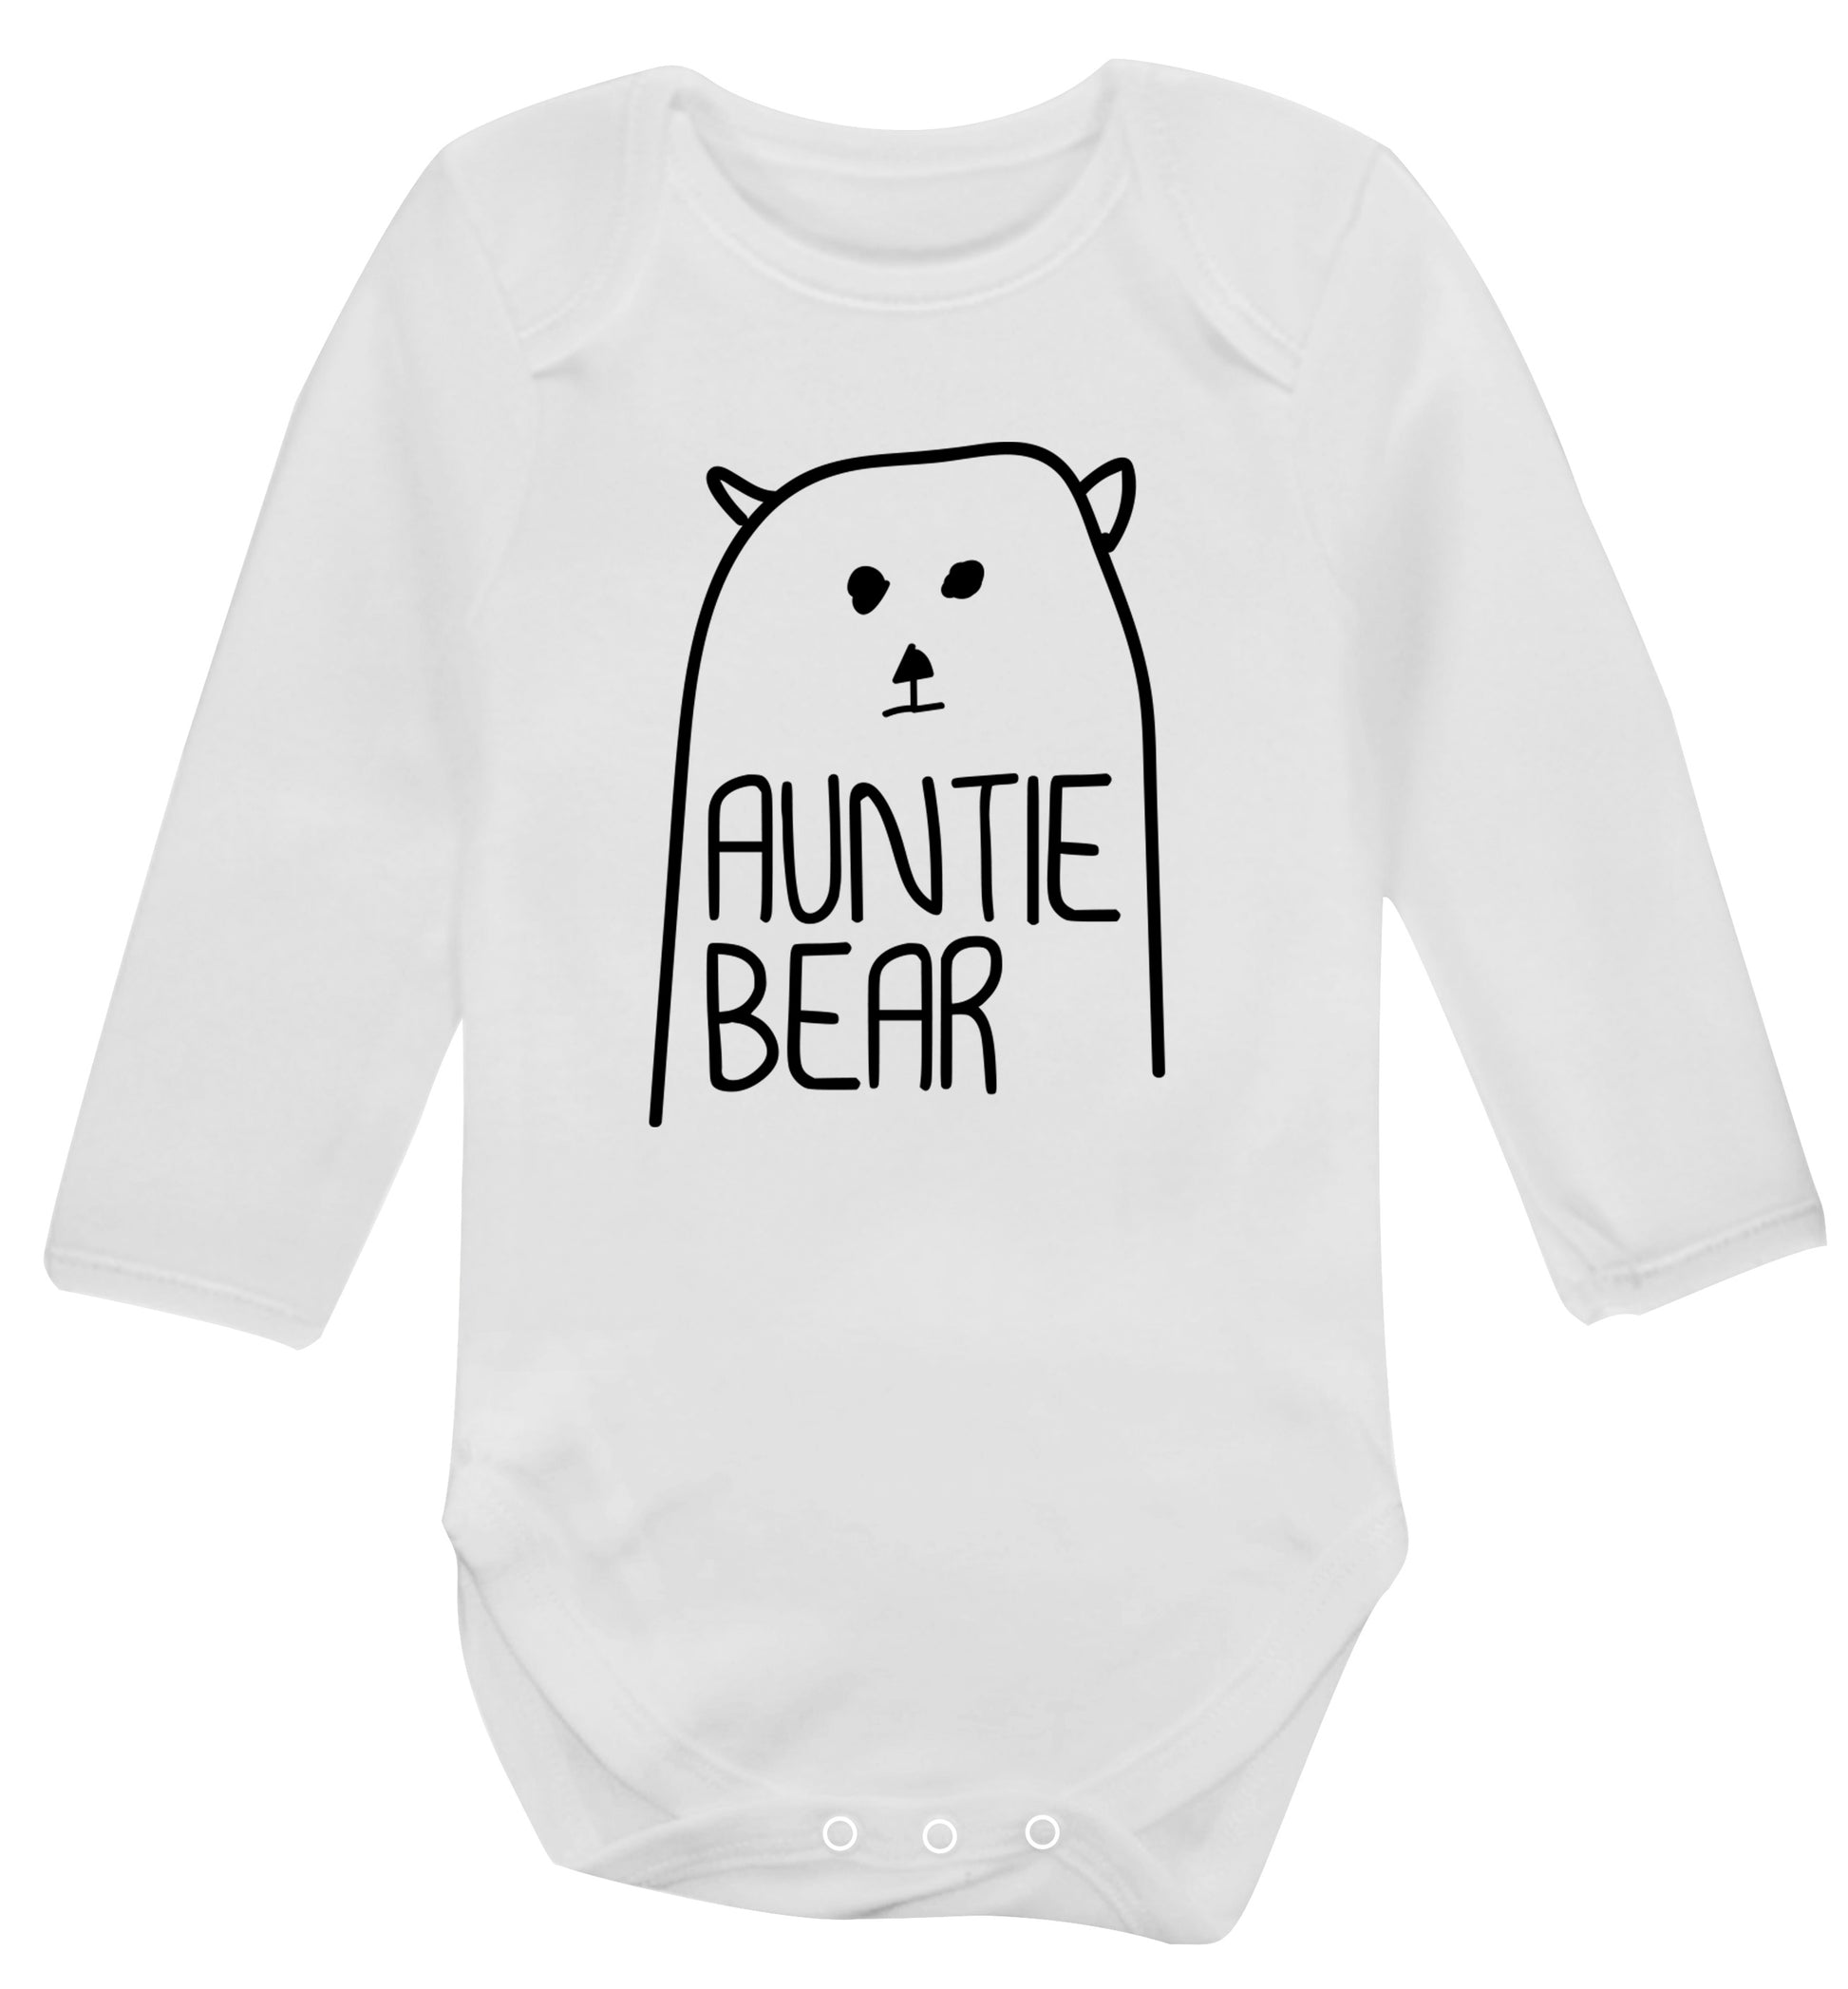 Auntie bear Baby Vest long sleeved white 6-12 months